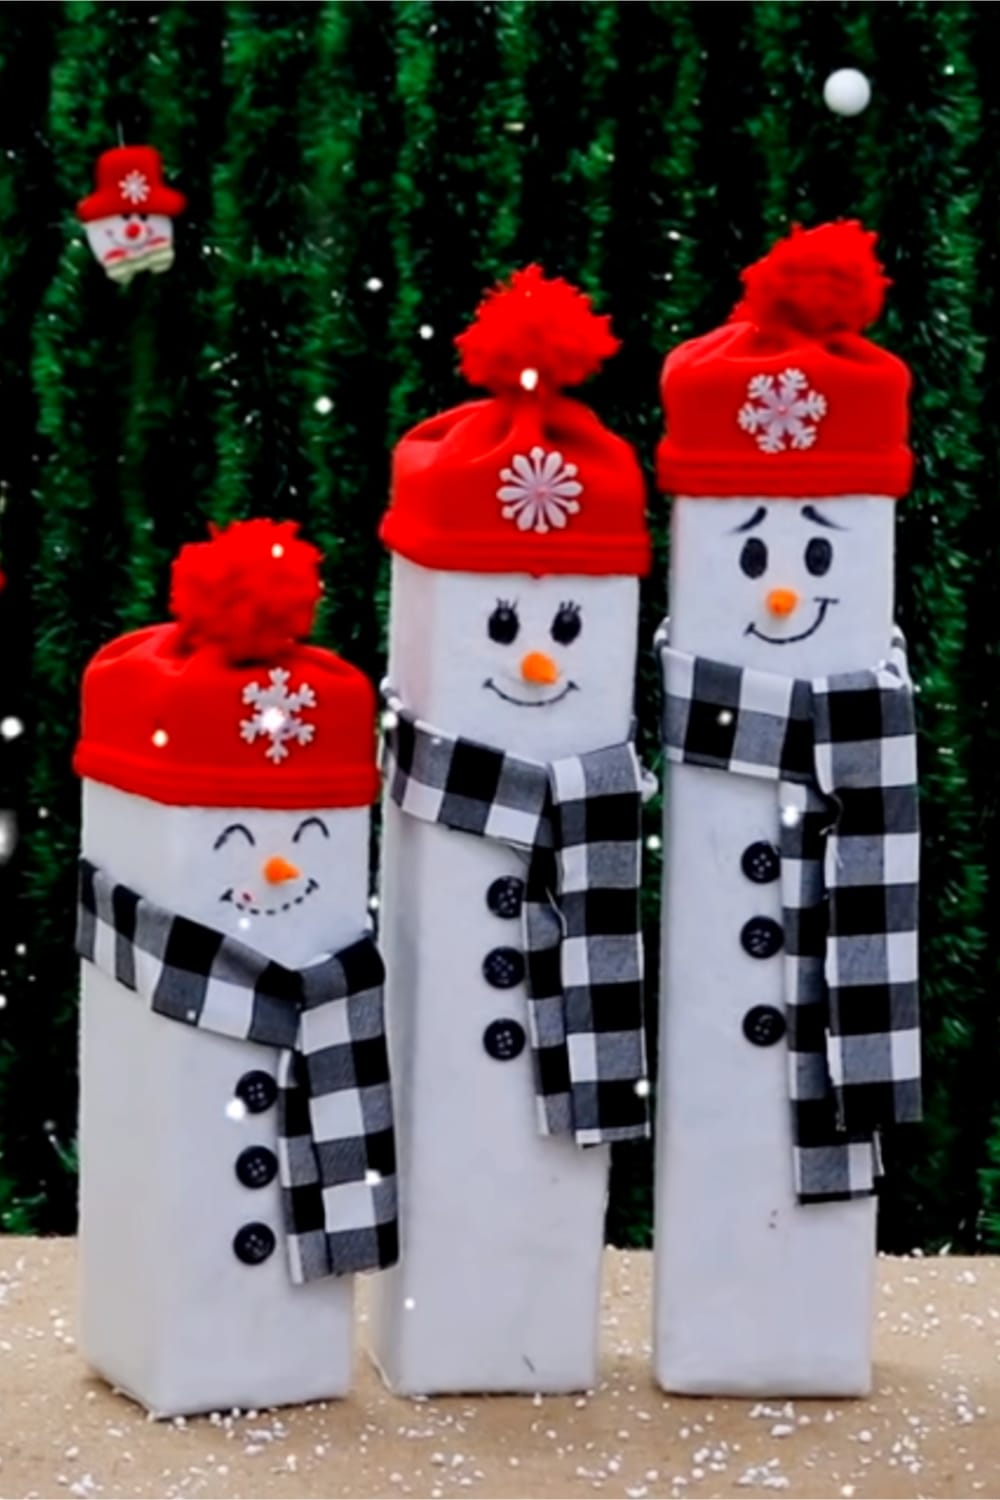 Christmas crafts for adults-simple Christmas craft ideas for adults to make - like these DIY snowmen with cute buffalo plaid scarves and red hats - so cute!